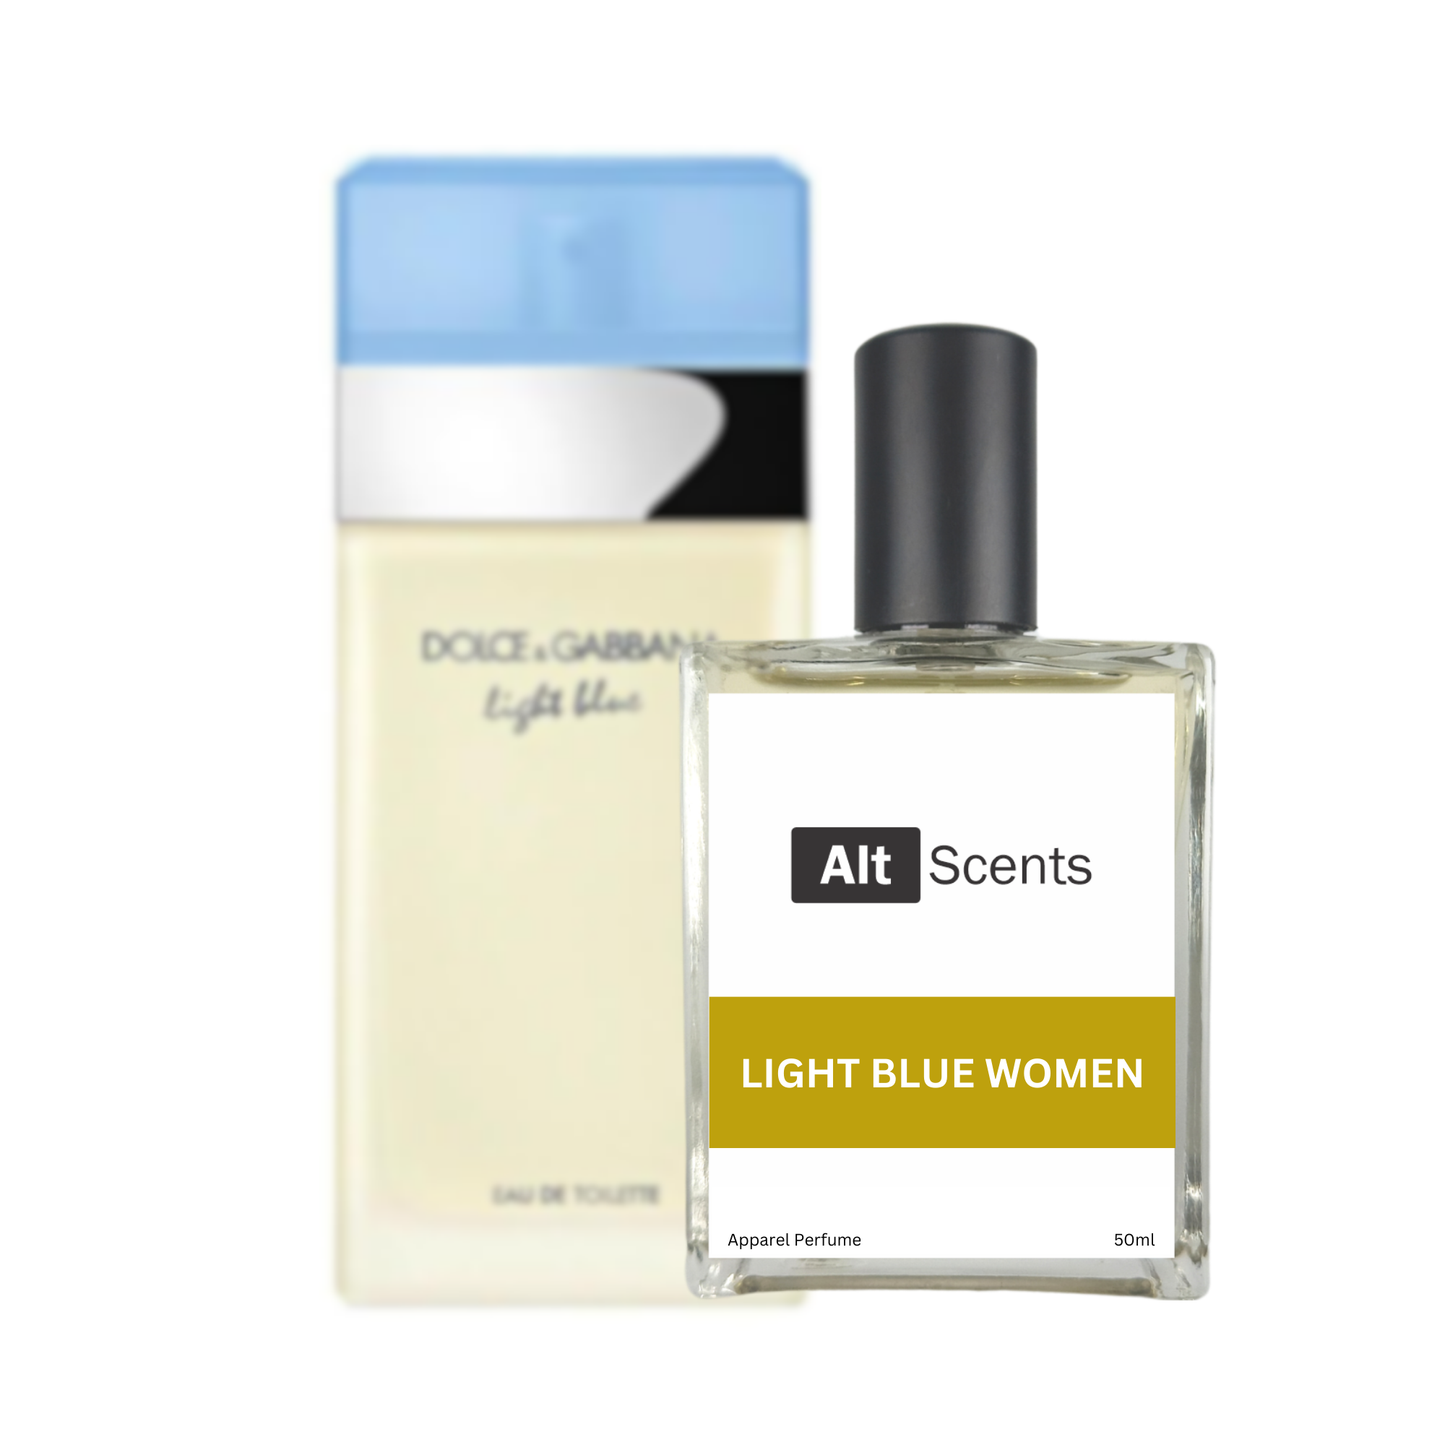 Altscents X Light Blue pour femme by Dol and G*bbana Perfume